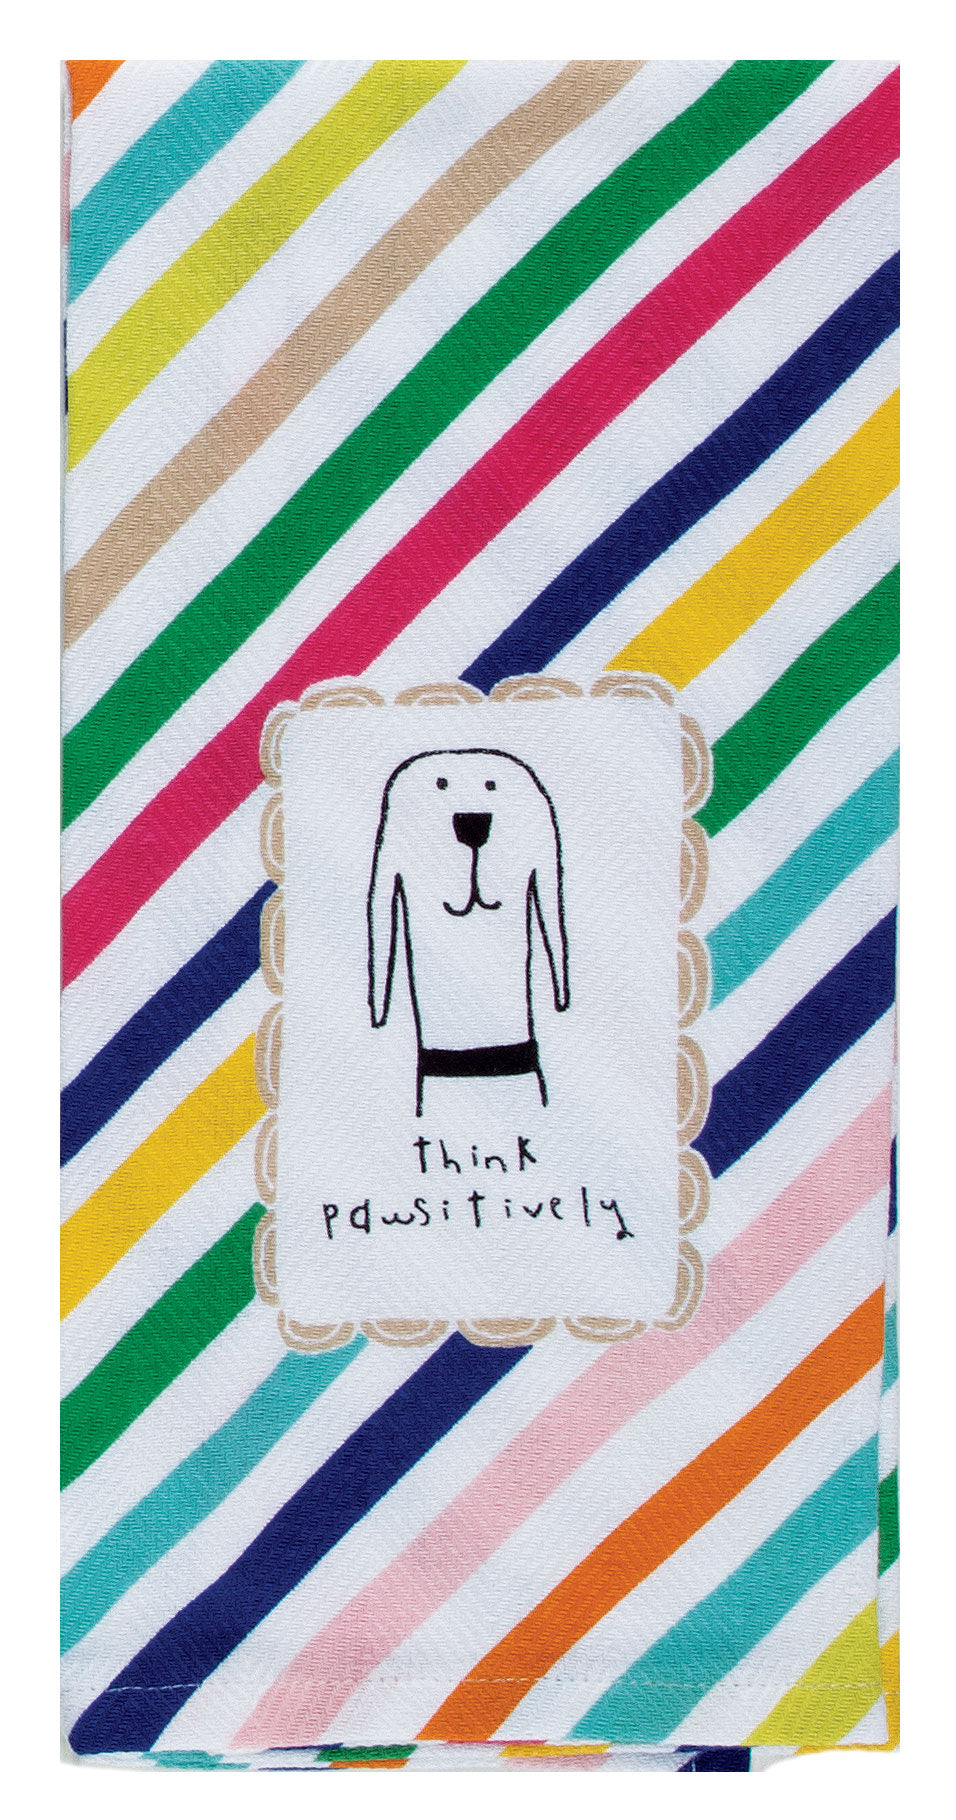 THINK PAWSITIVELY TEA TOWEL - Molly's! A Chic and Unique Boutique 